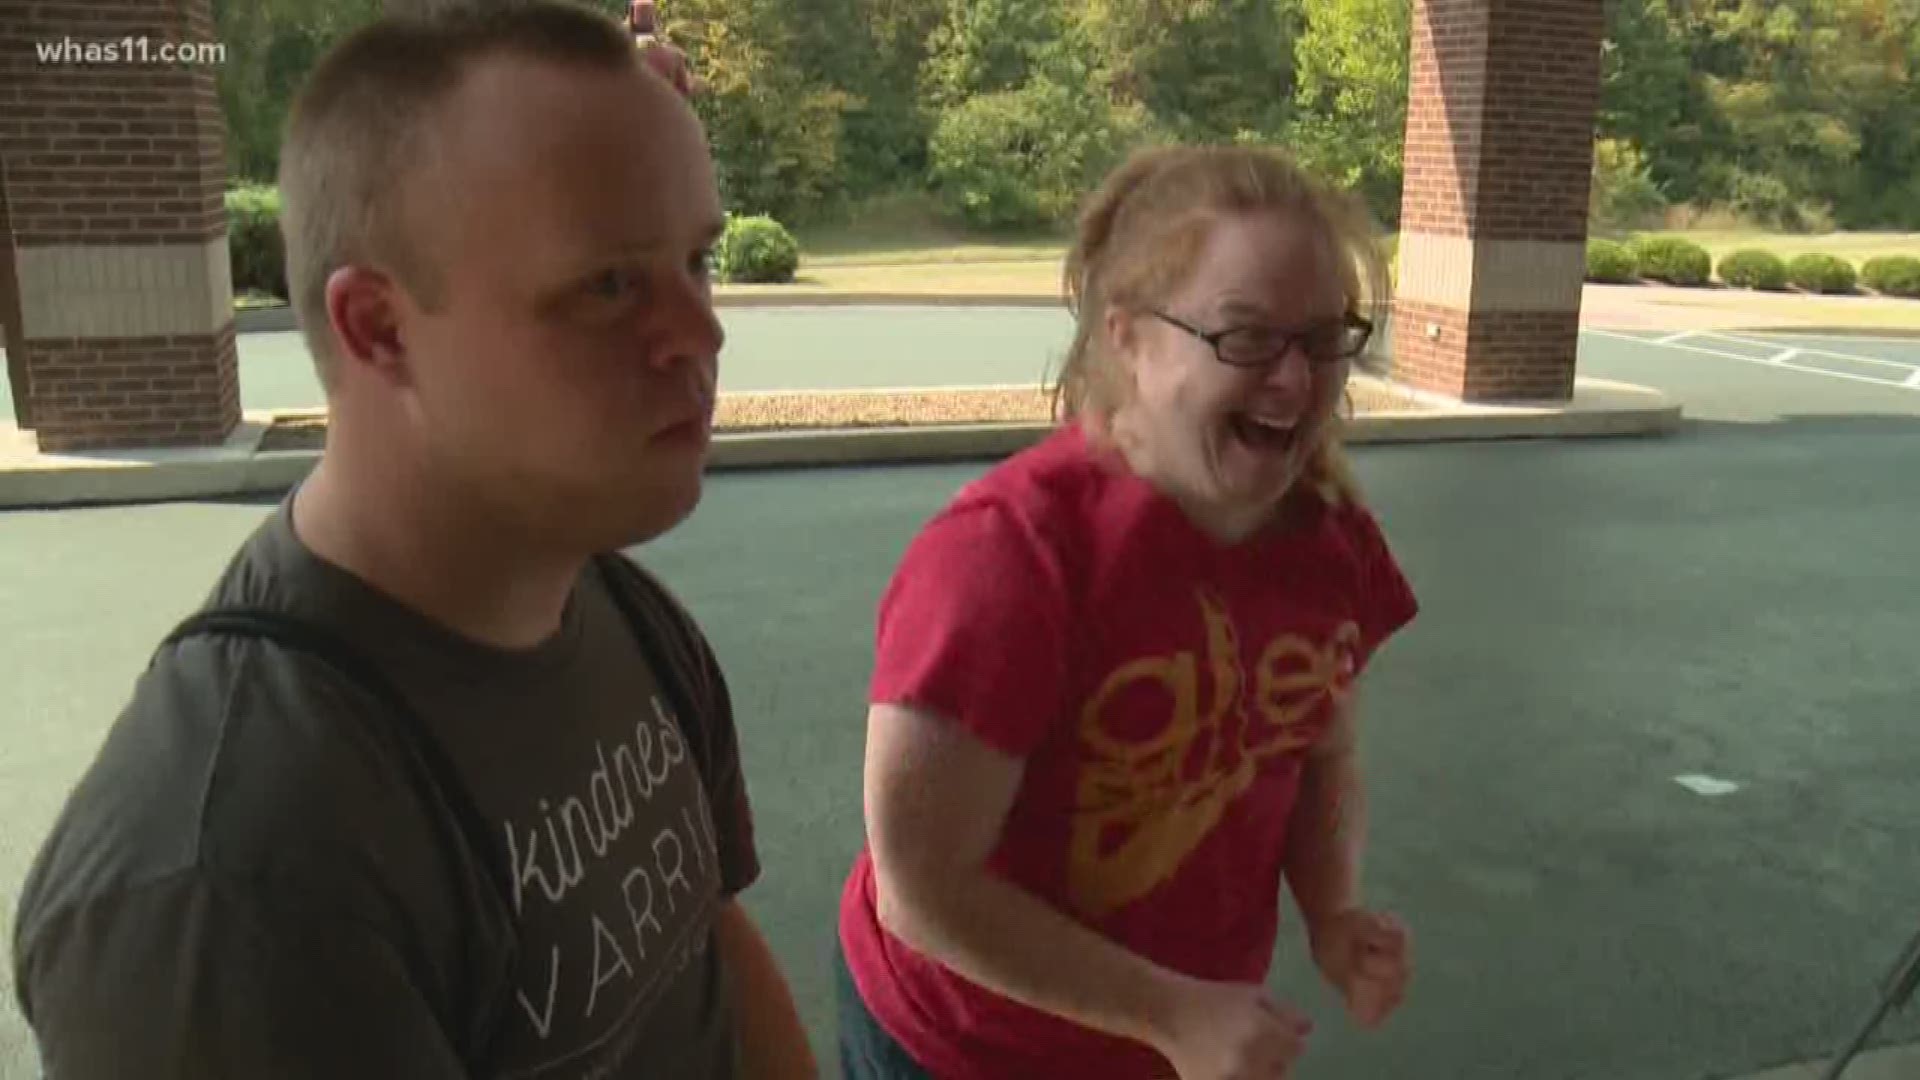 The group from Down syndrome of Louisville got the attention from the Backstreet Boys and will get a special meet and greet during their show at the KFC Yum! Center Friday night.